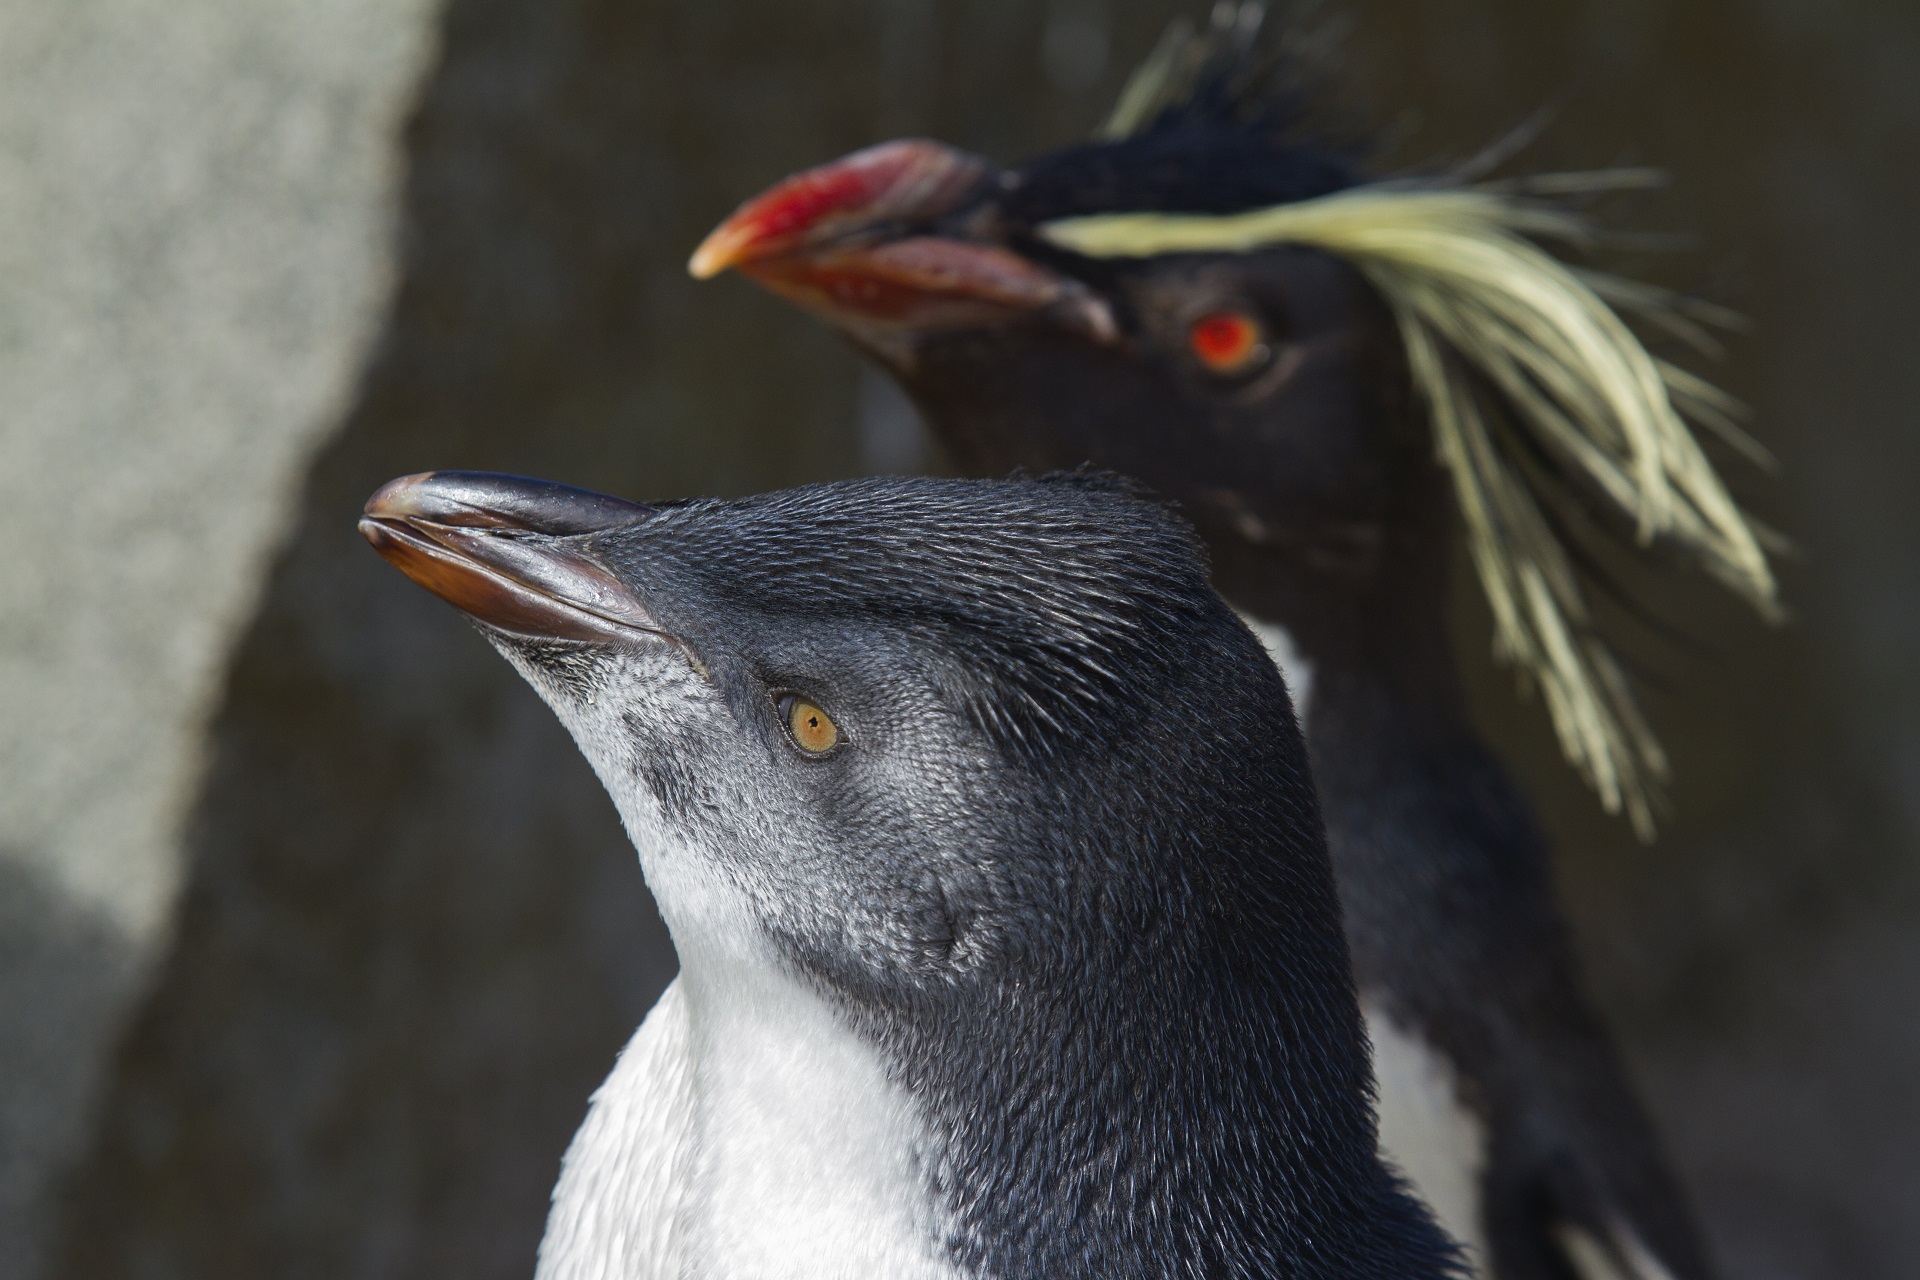 Rockhopper adult and chick